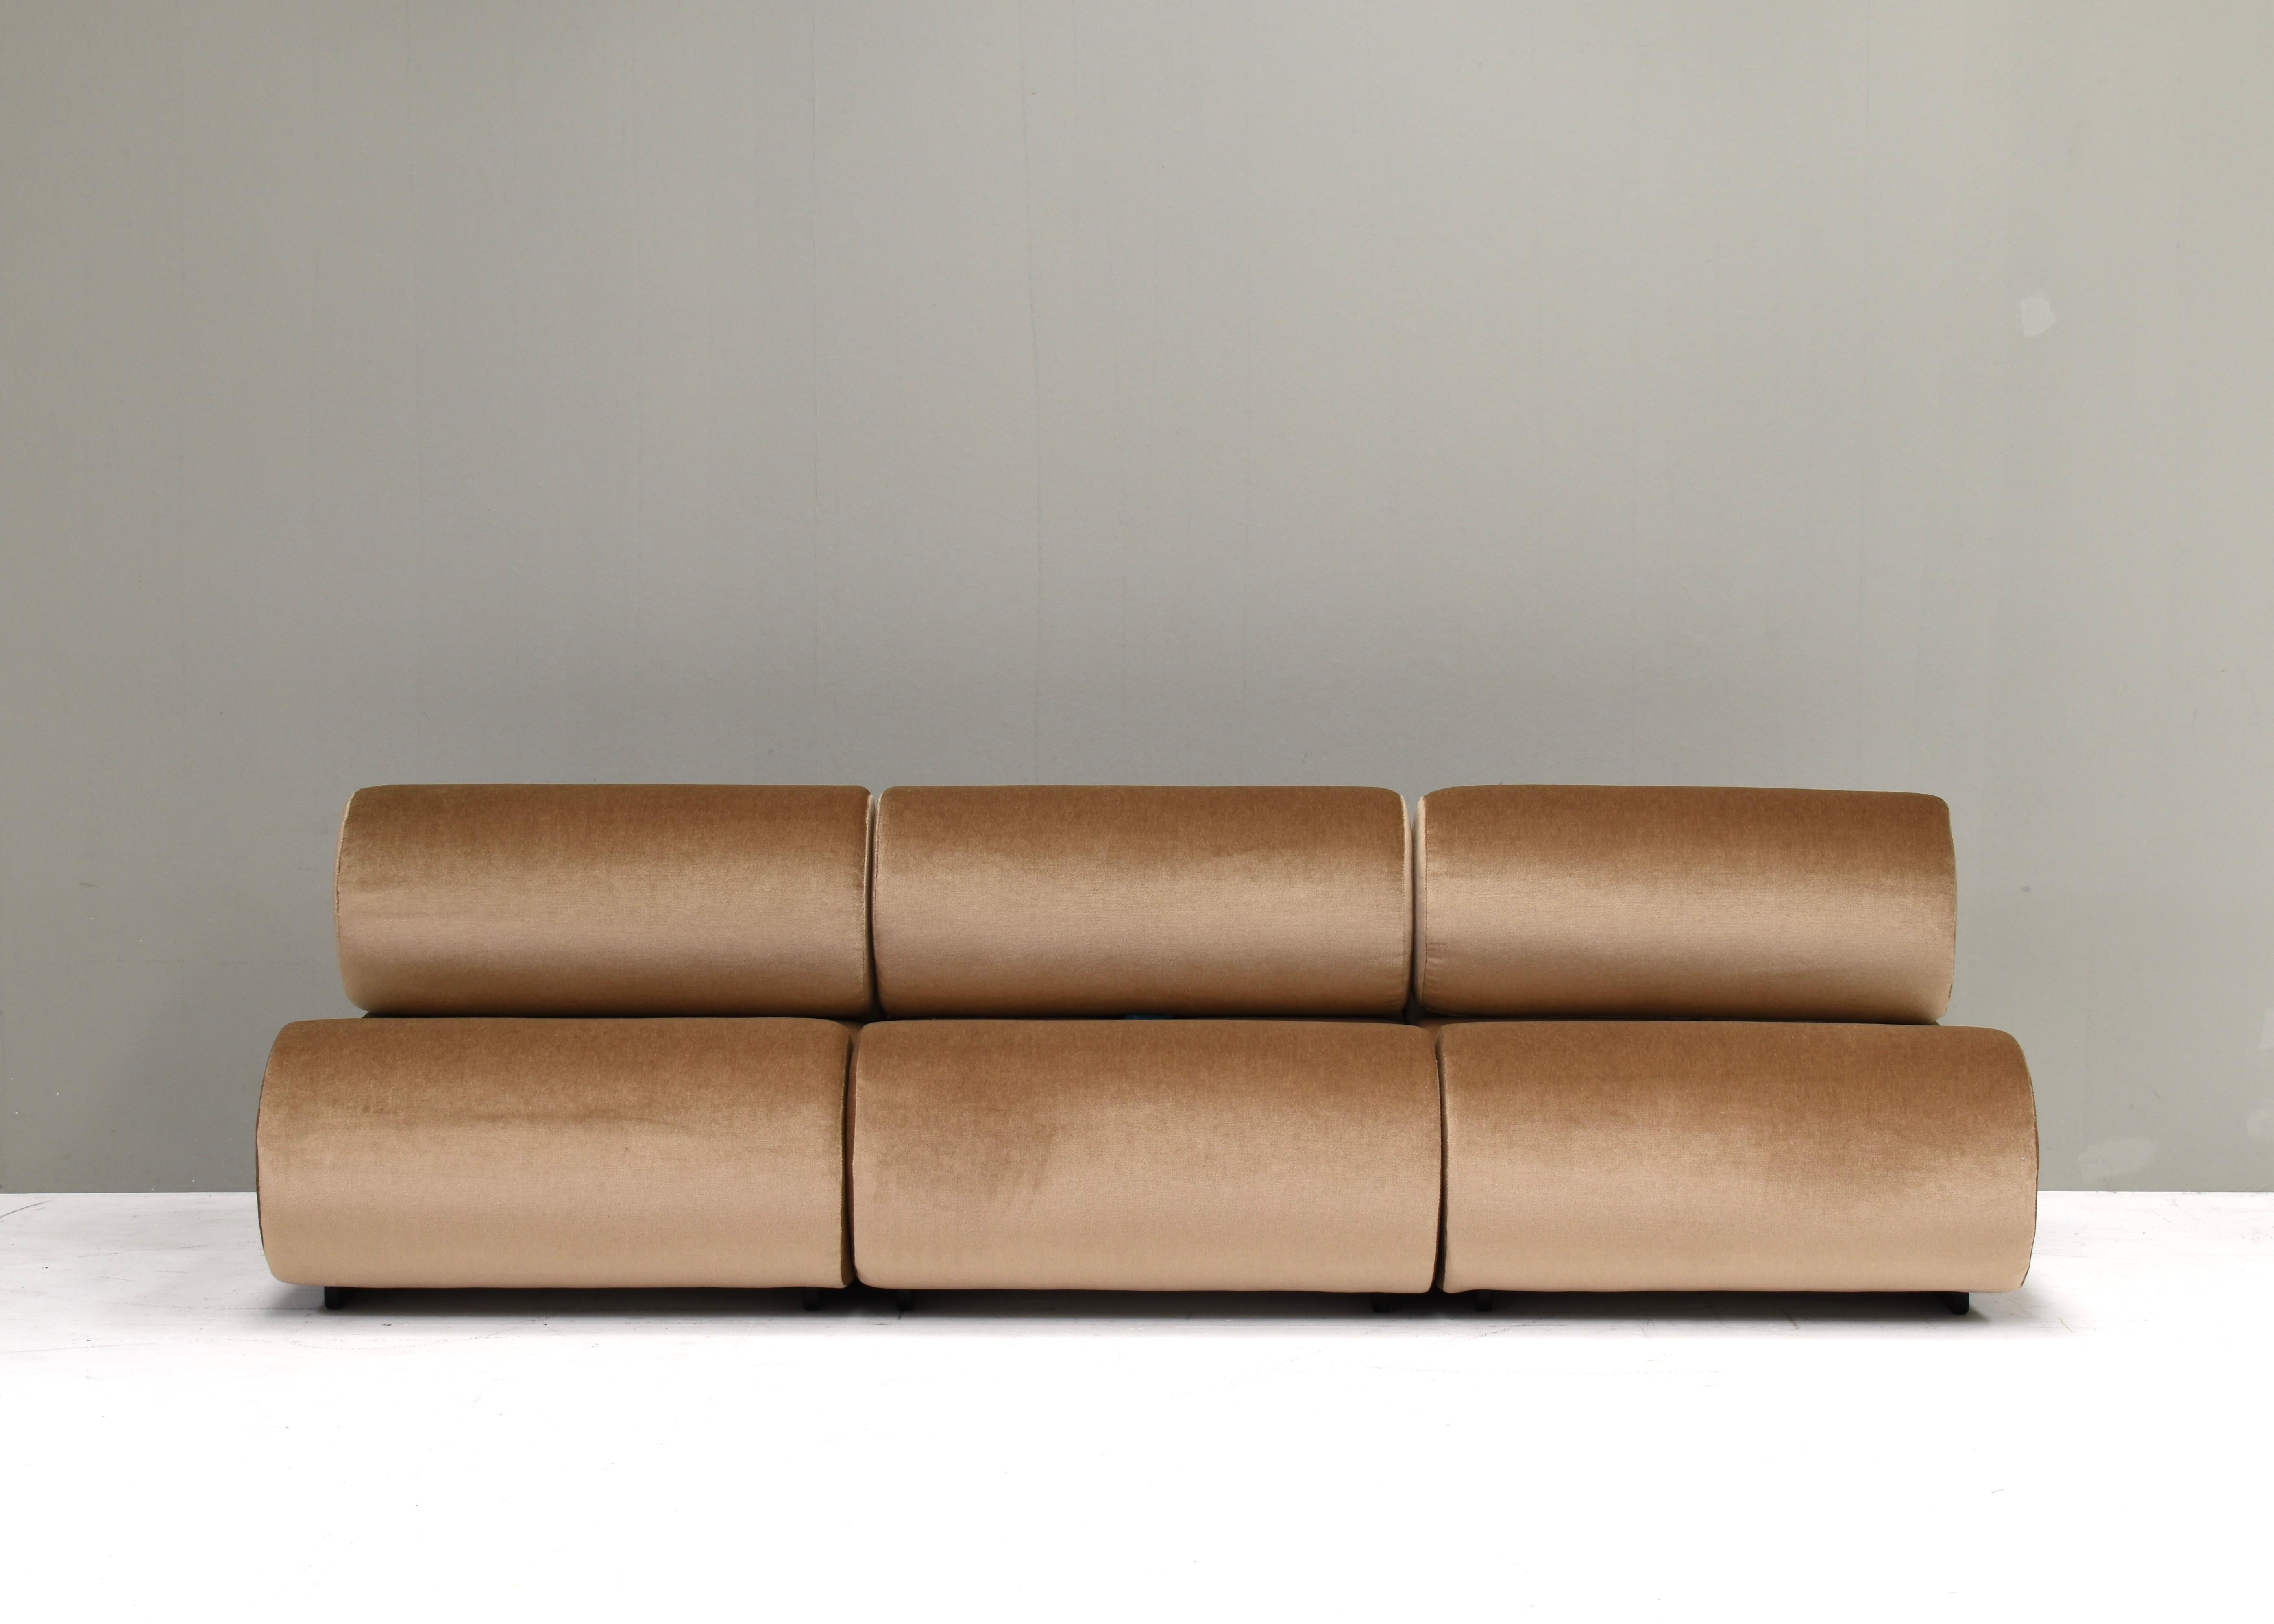 Klaus Uredat ‘Corbi’ Sofa for COR in New Mohair Upholstery, Germany – 1969 In Good Condition For Sale In Pijnacker, Zuid-Holland